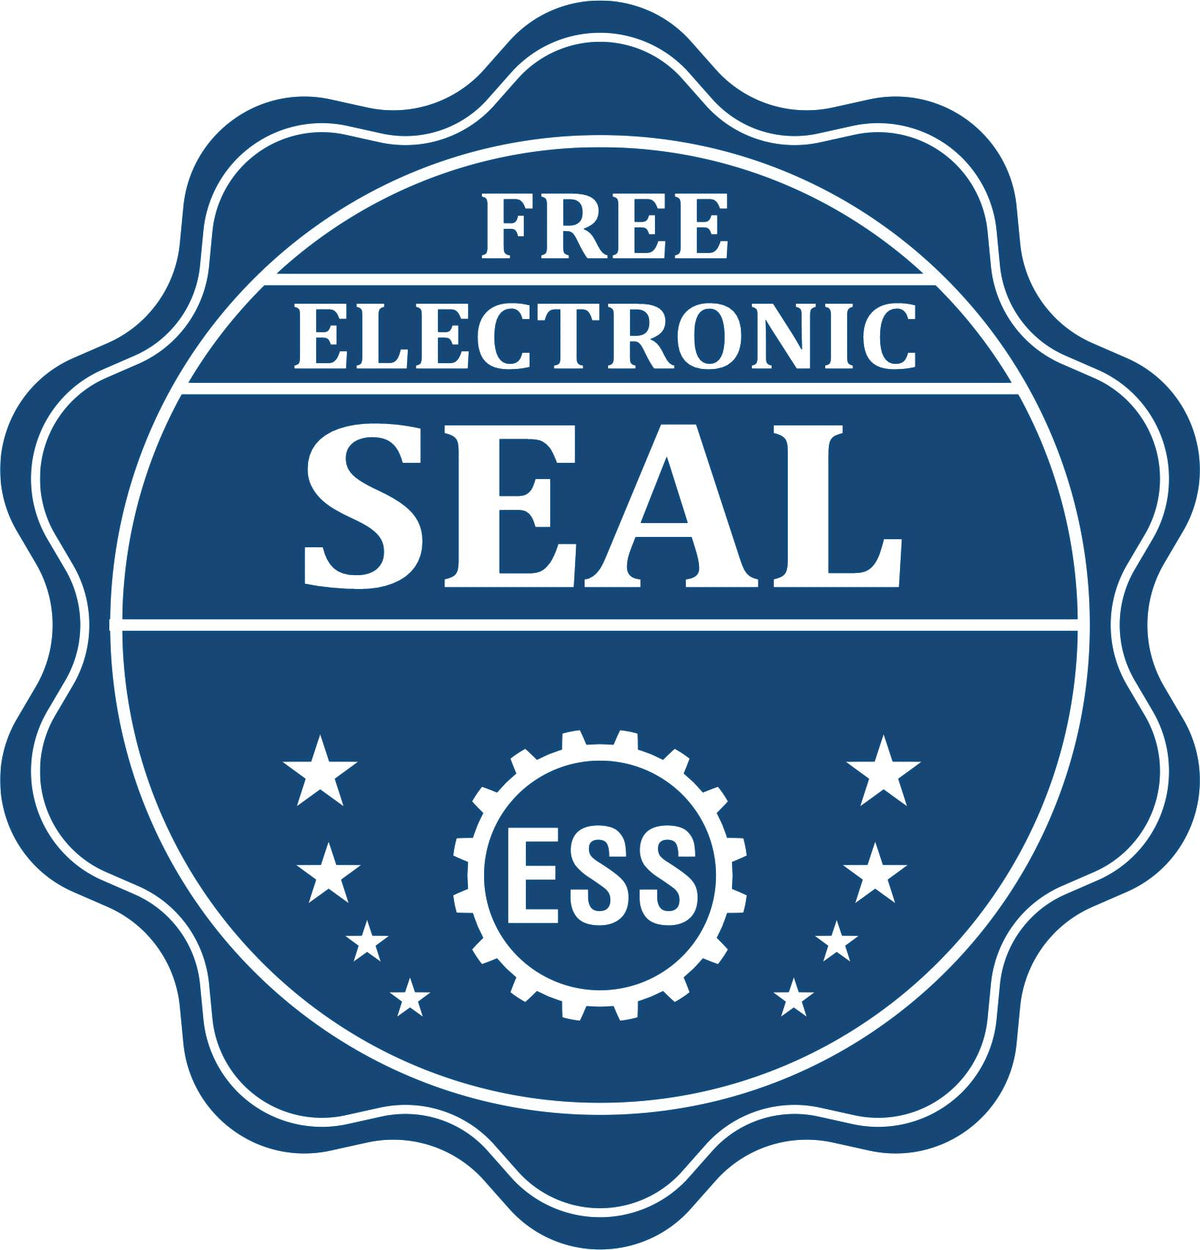 A badge showing a free electronic seal for the Maryland Engineer Desk Seal with stars and the ESS gear on the emblem.